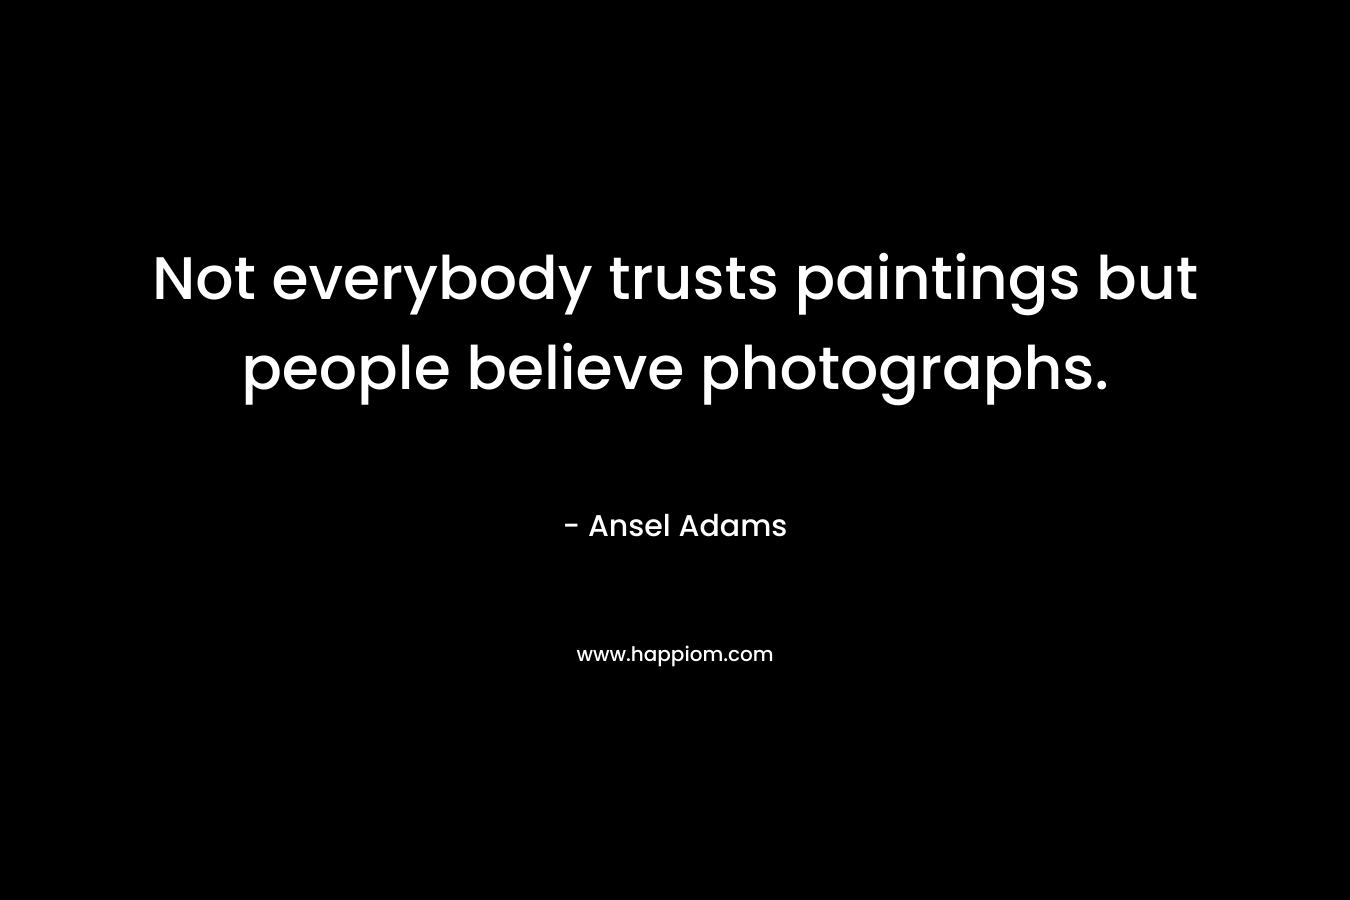 Not everybody trusts paintings but people believe photographs. – Ansel Adams